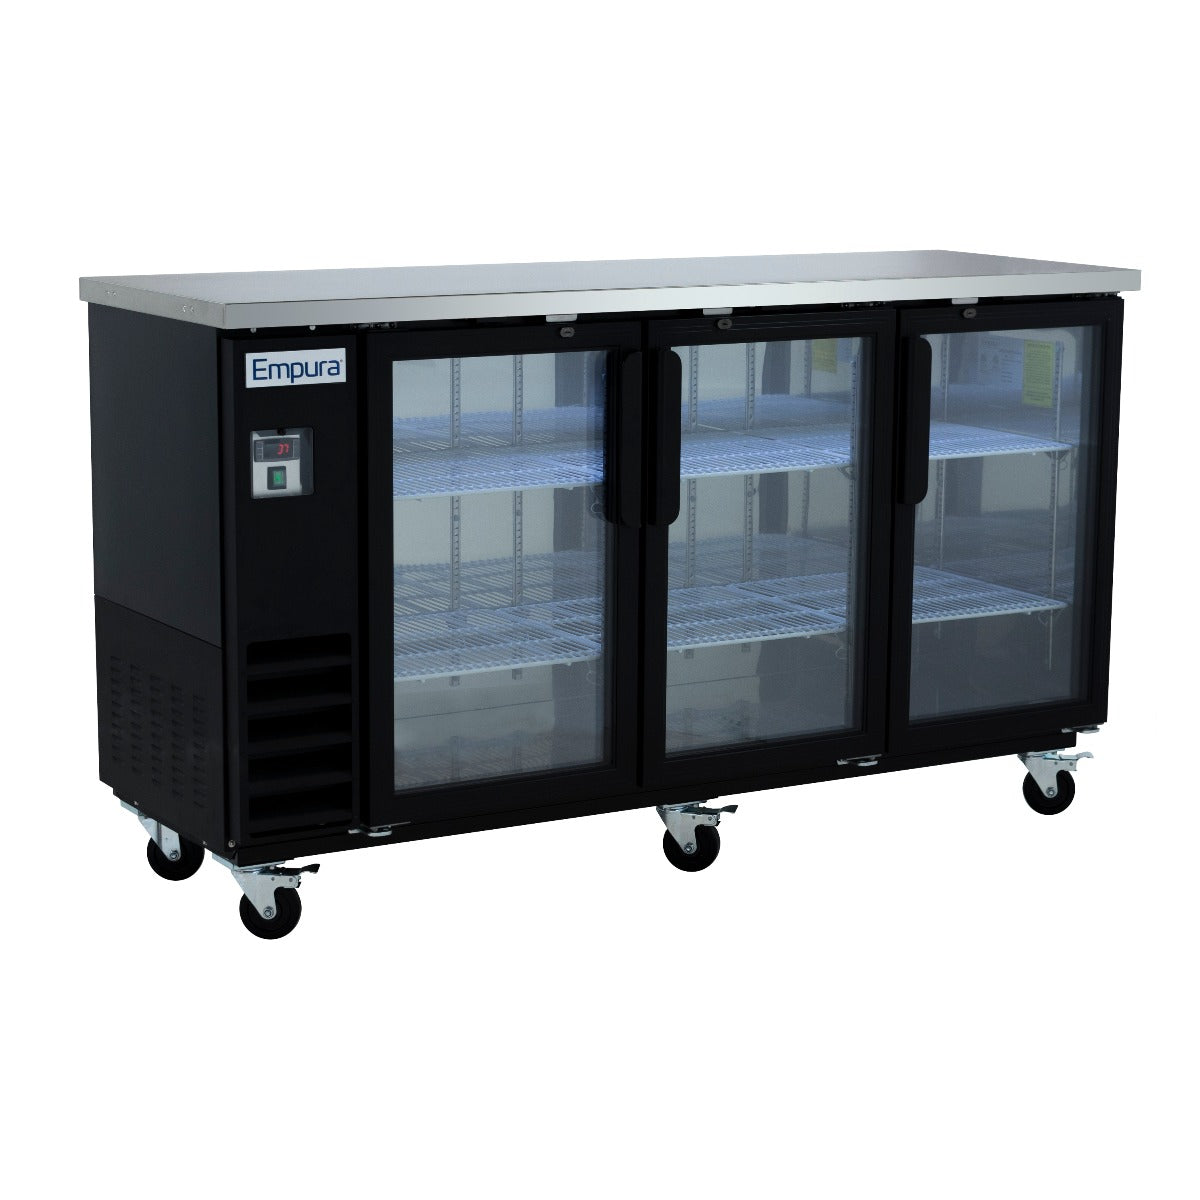 Empura E-KBB72-3G-24 72" Three Glass Door Refrigerated Back Bar Storage Cabinet, Black Exterior with Stainless Steel Top - 20.8 Cu Ft